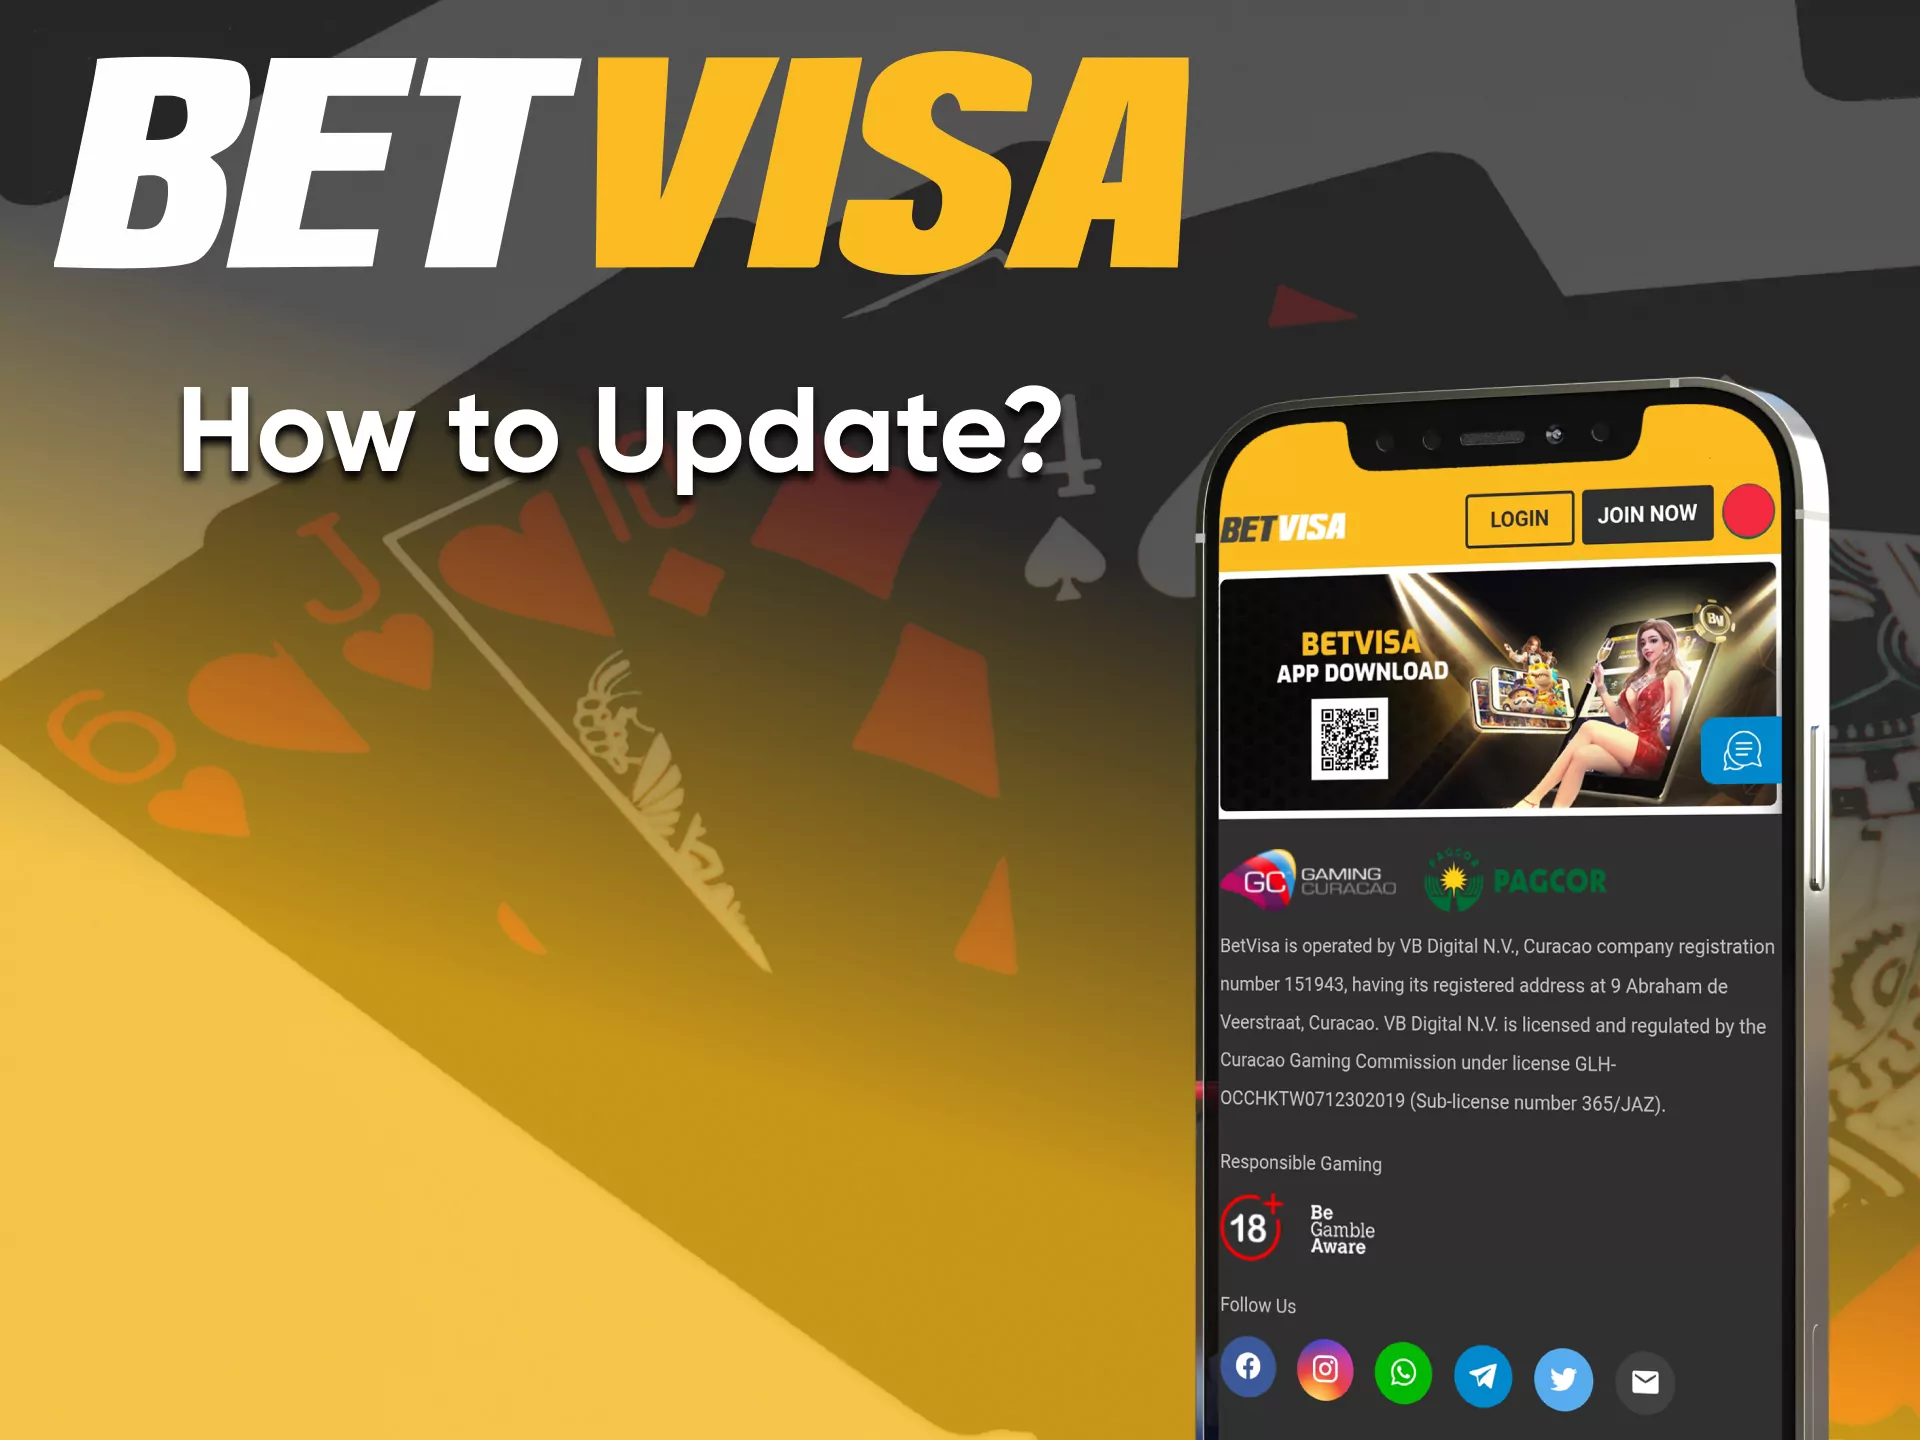 Update the application for the quality work of the casino from BetVisa.